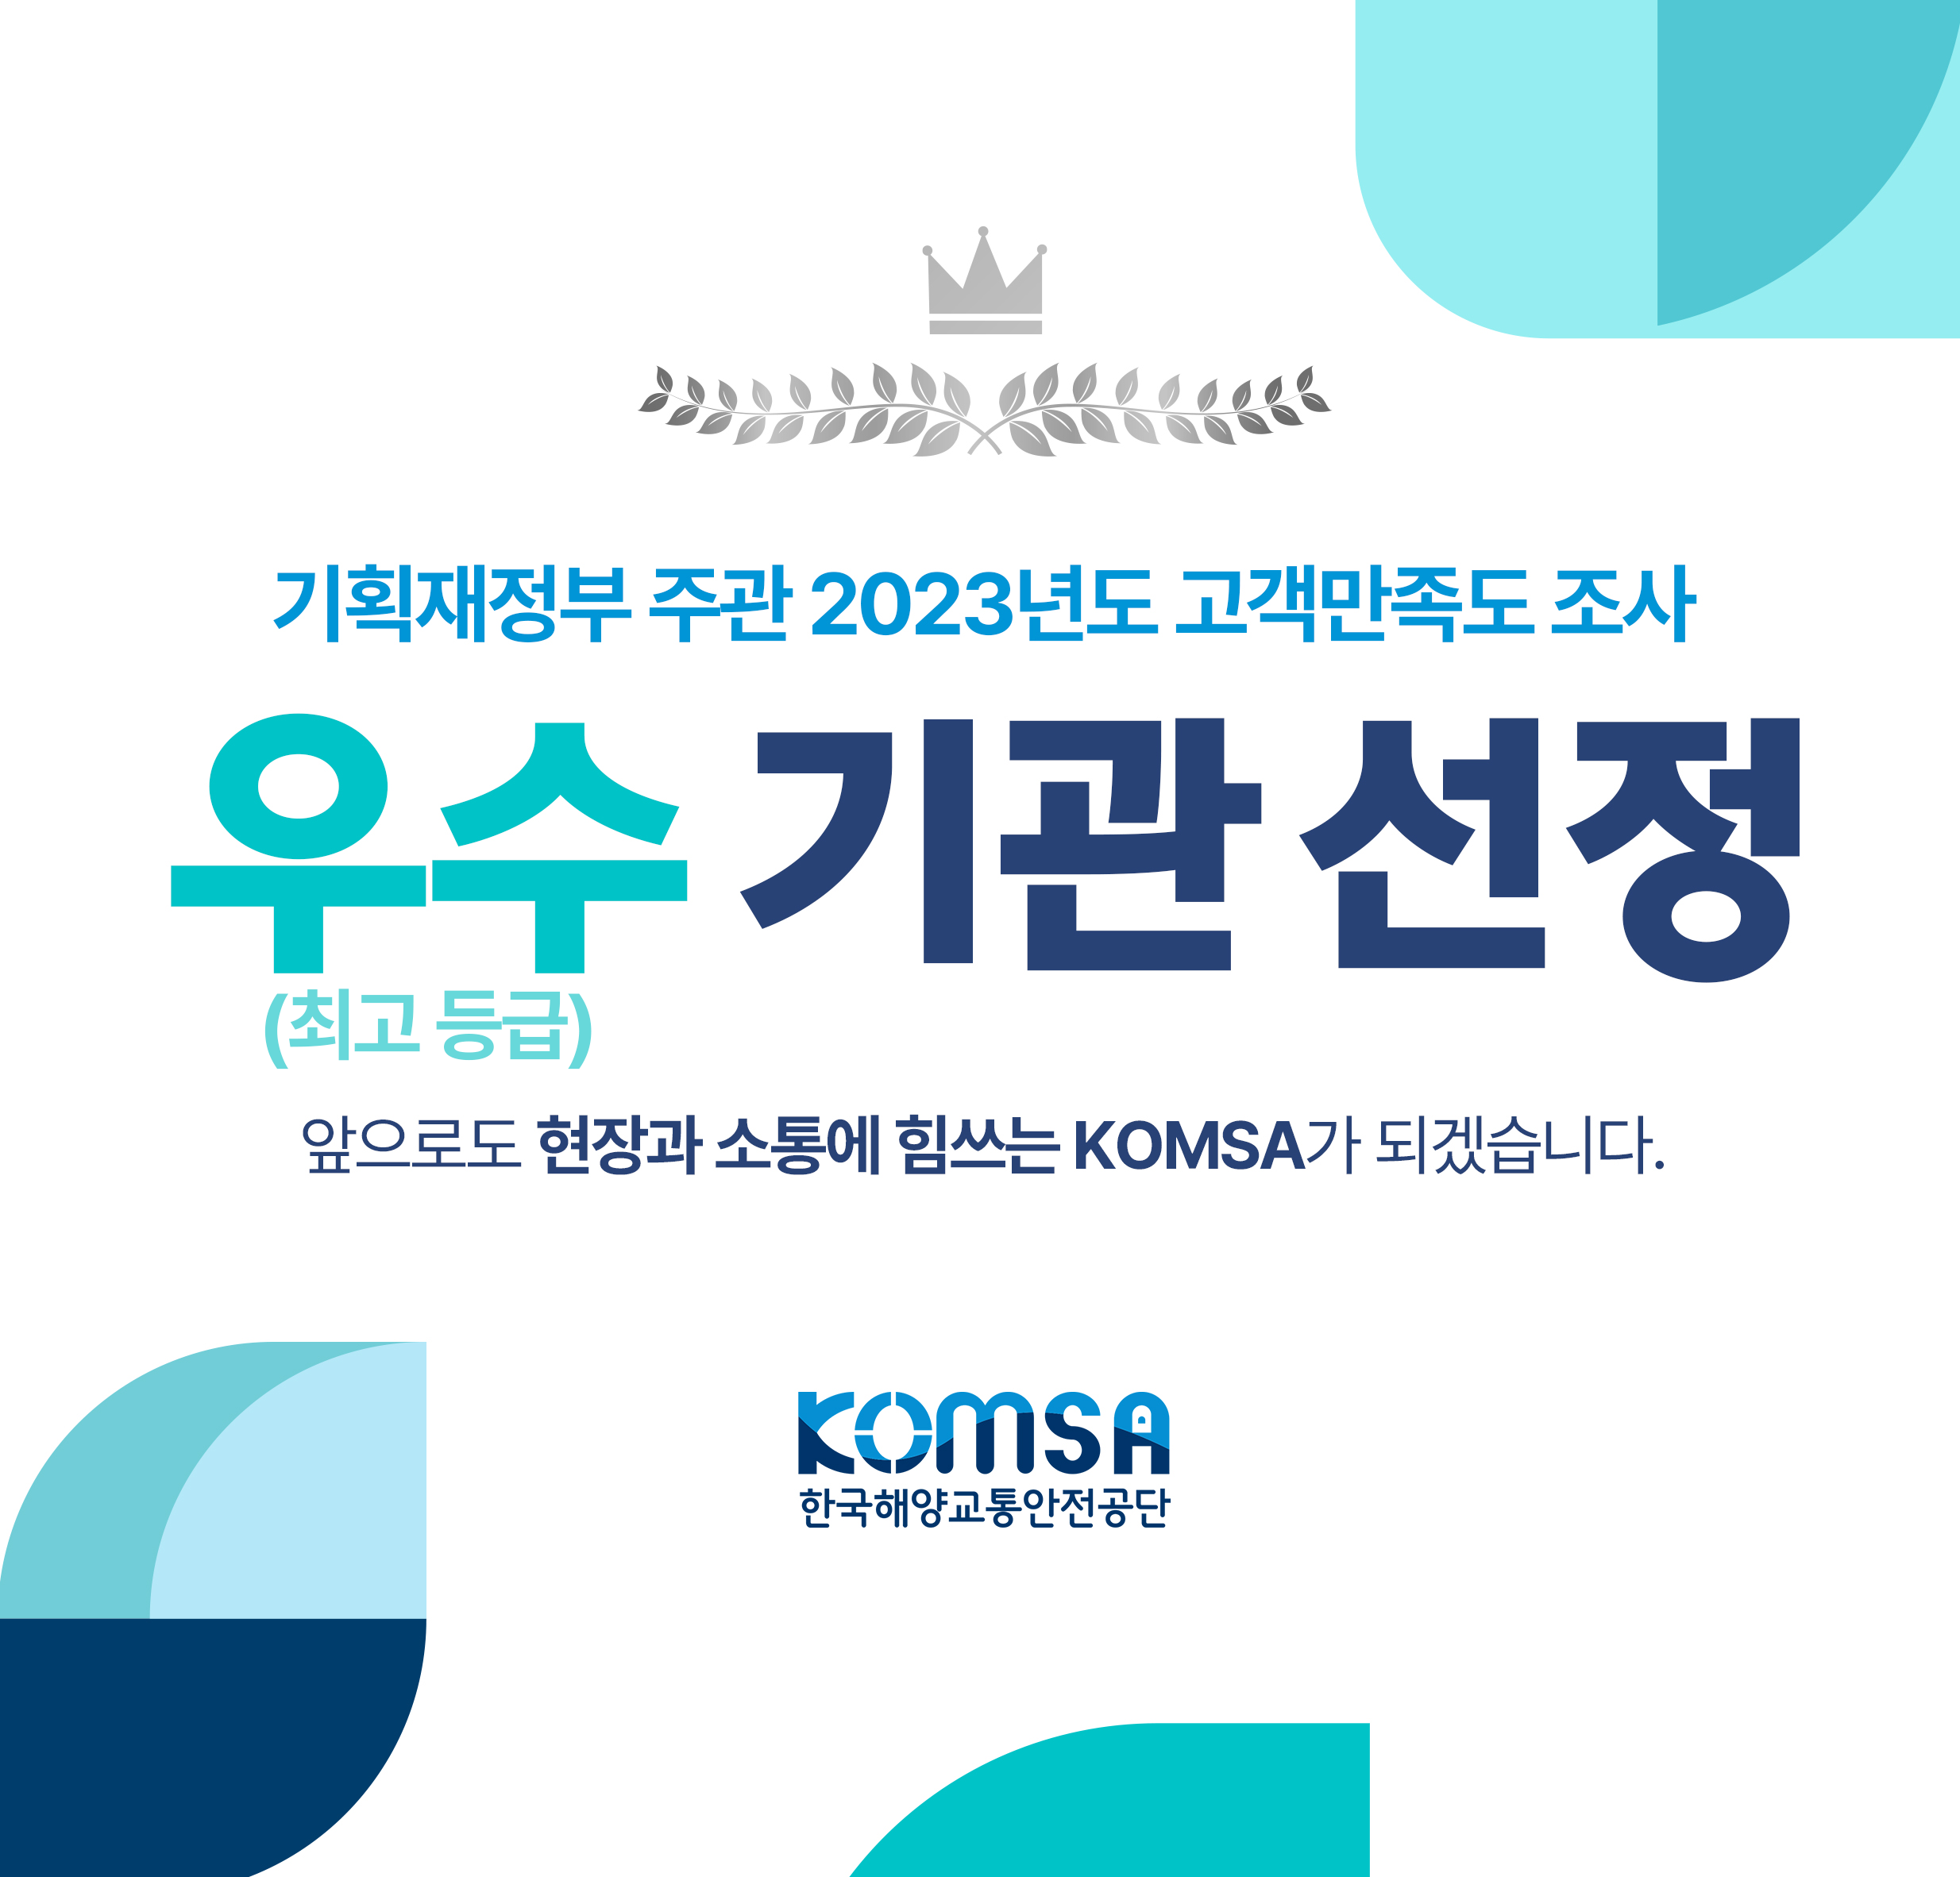 https://www.komsa.or.kr/kor/;jsessionid=D6BC22EAE6A707A84AA8AEA5A58D7C49